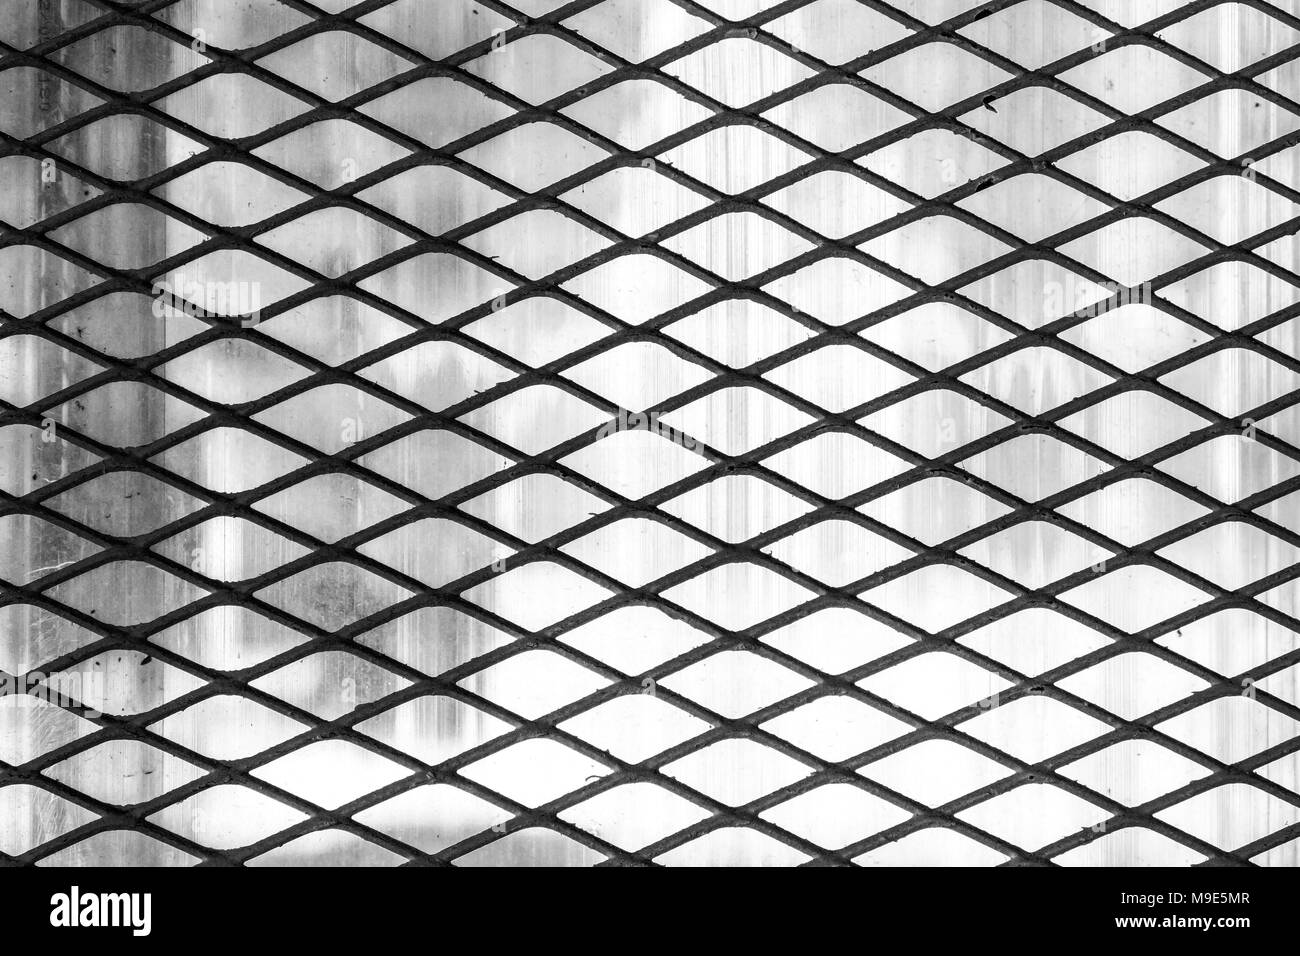 Dark metal wire protective diagonal grid or mesh, soft grey background. Black and white photo Stock Photo